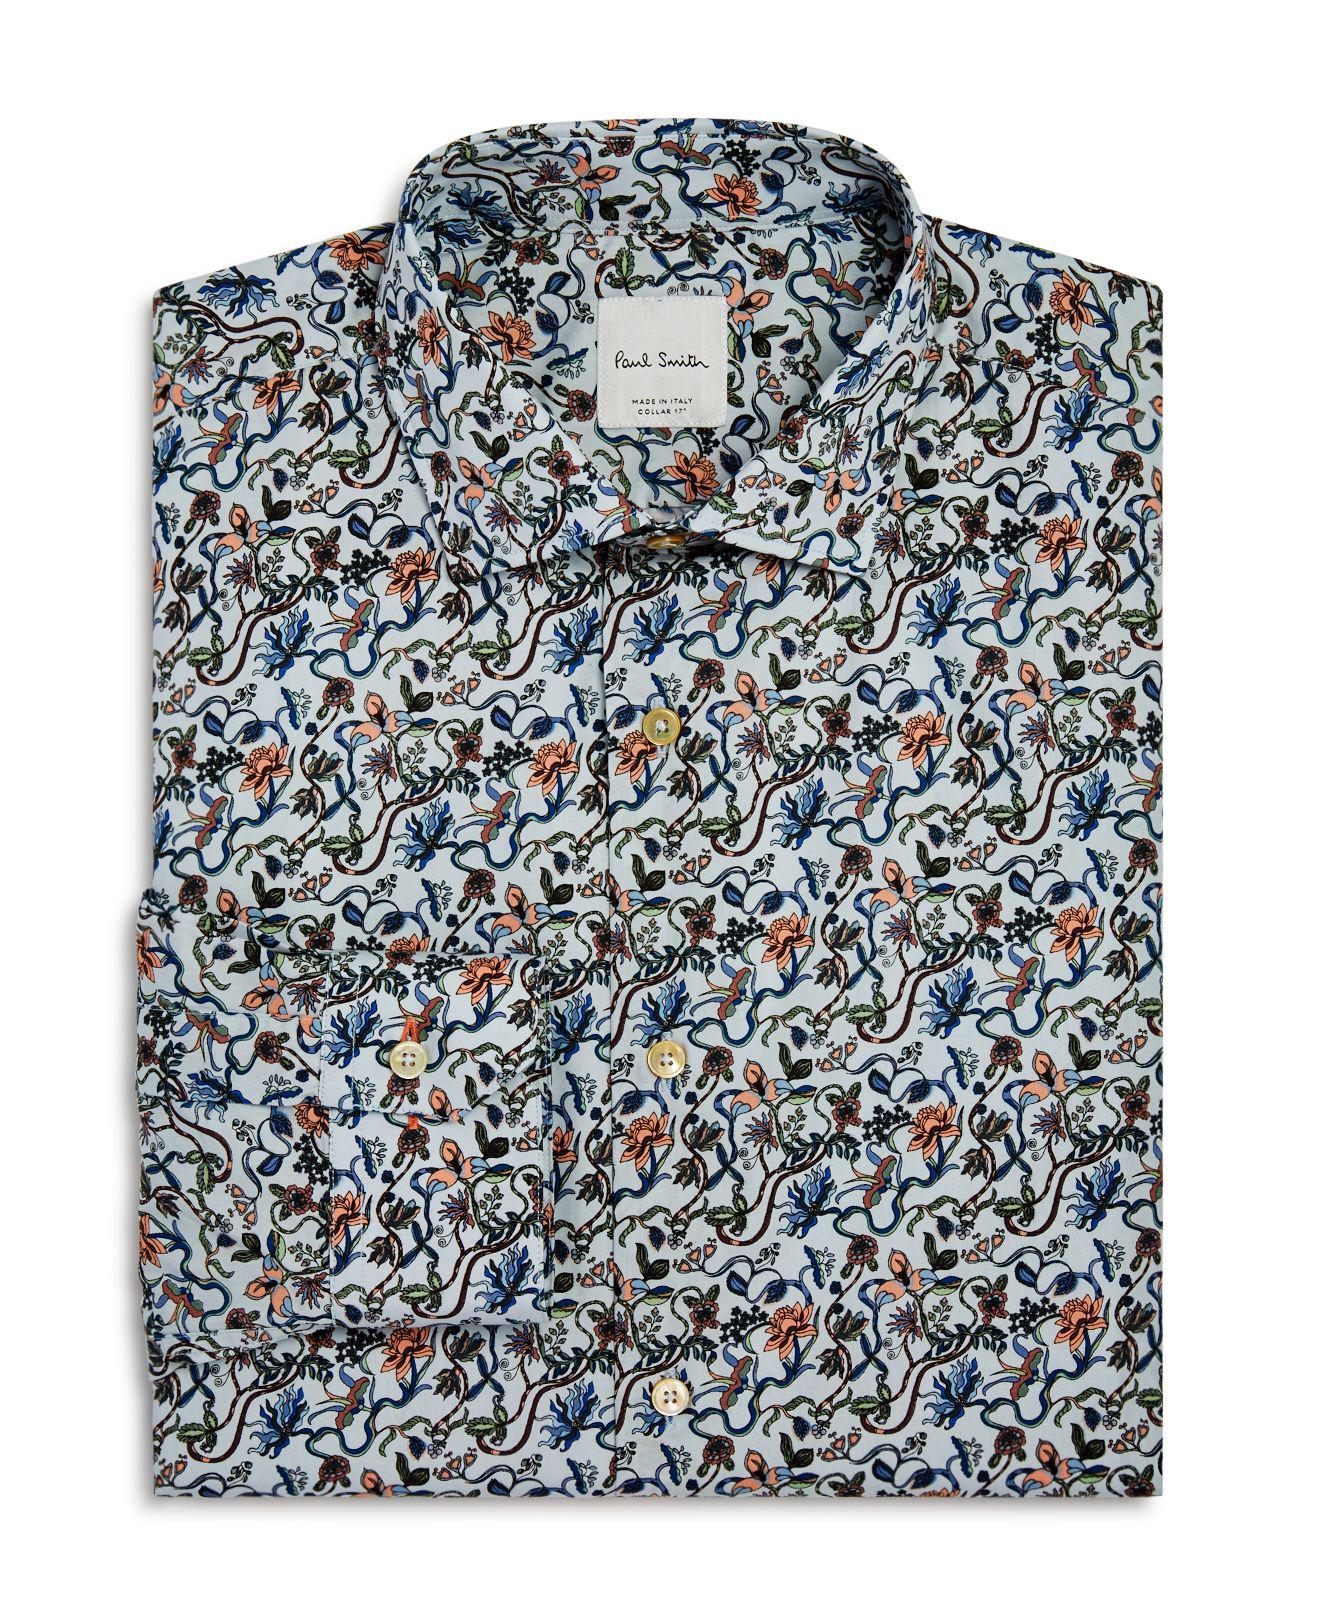 Paul Smith Twisted Floral Slim Fit Dress Shirt in Blue for Men - Lyst